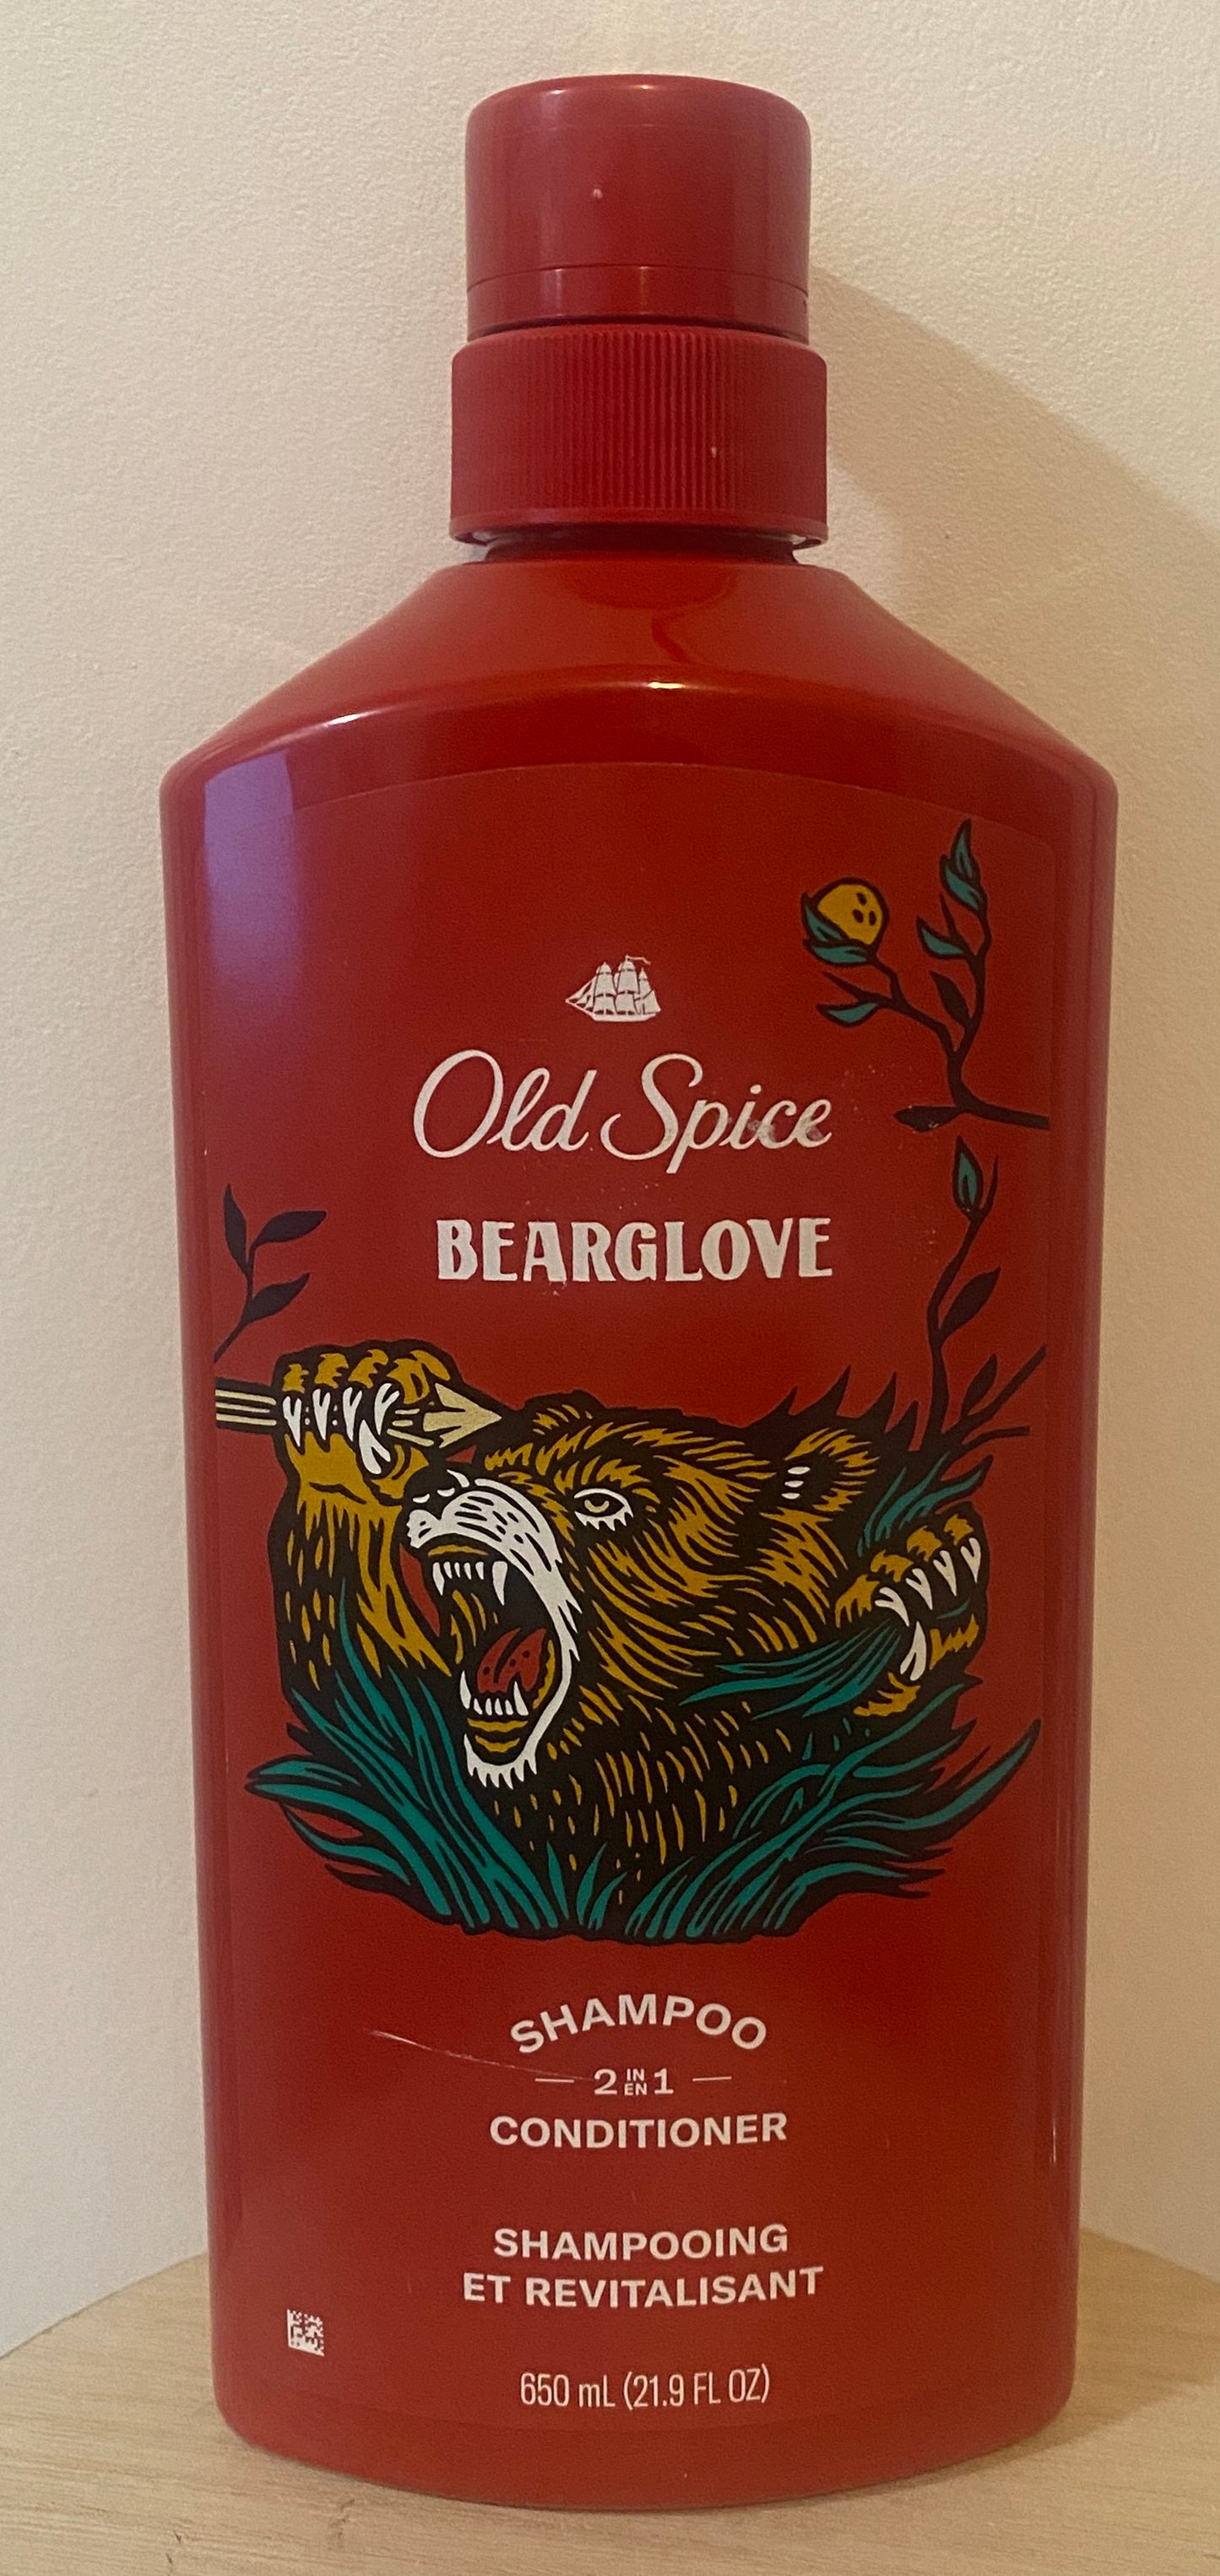 OLD SPICE BEARGLOVE